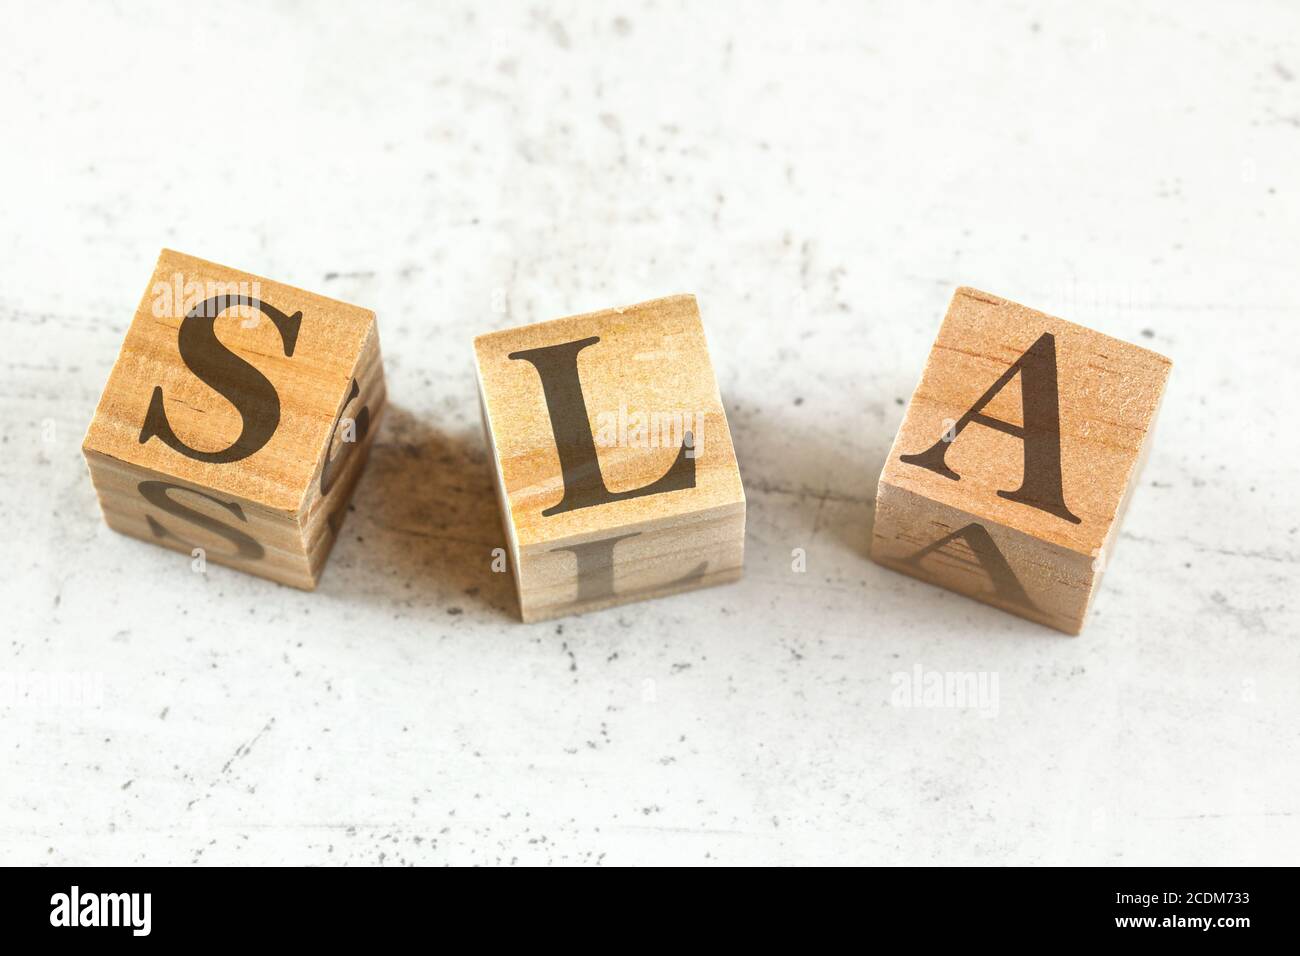 Premium Photo  Letters of the alphabet of sla on wooden cubes green plant  white background sla short for service level agreement